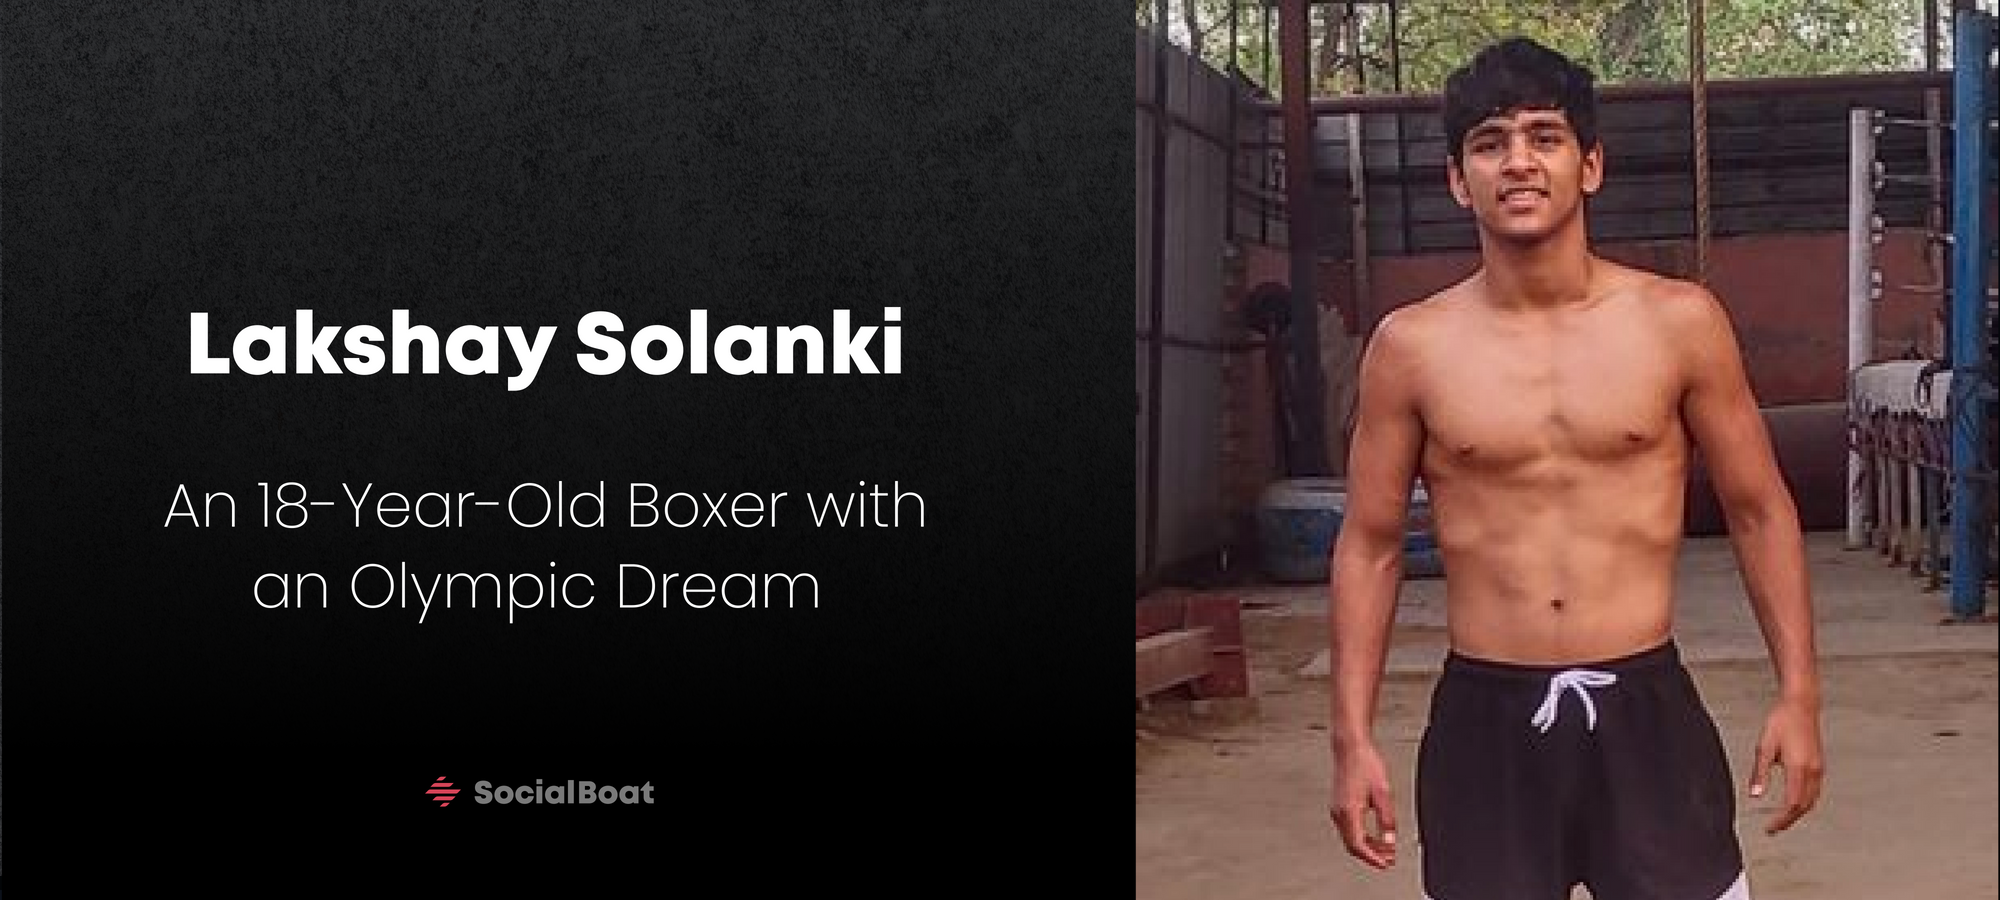 Lakshay is an 18-year-old national-level boxer from Haryana.